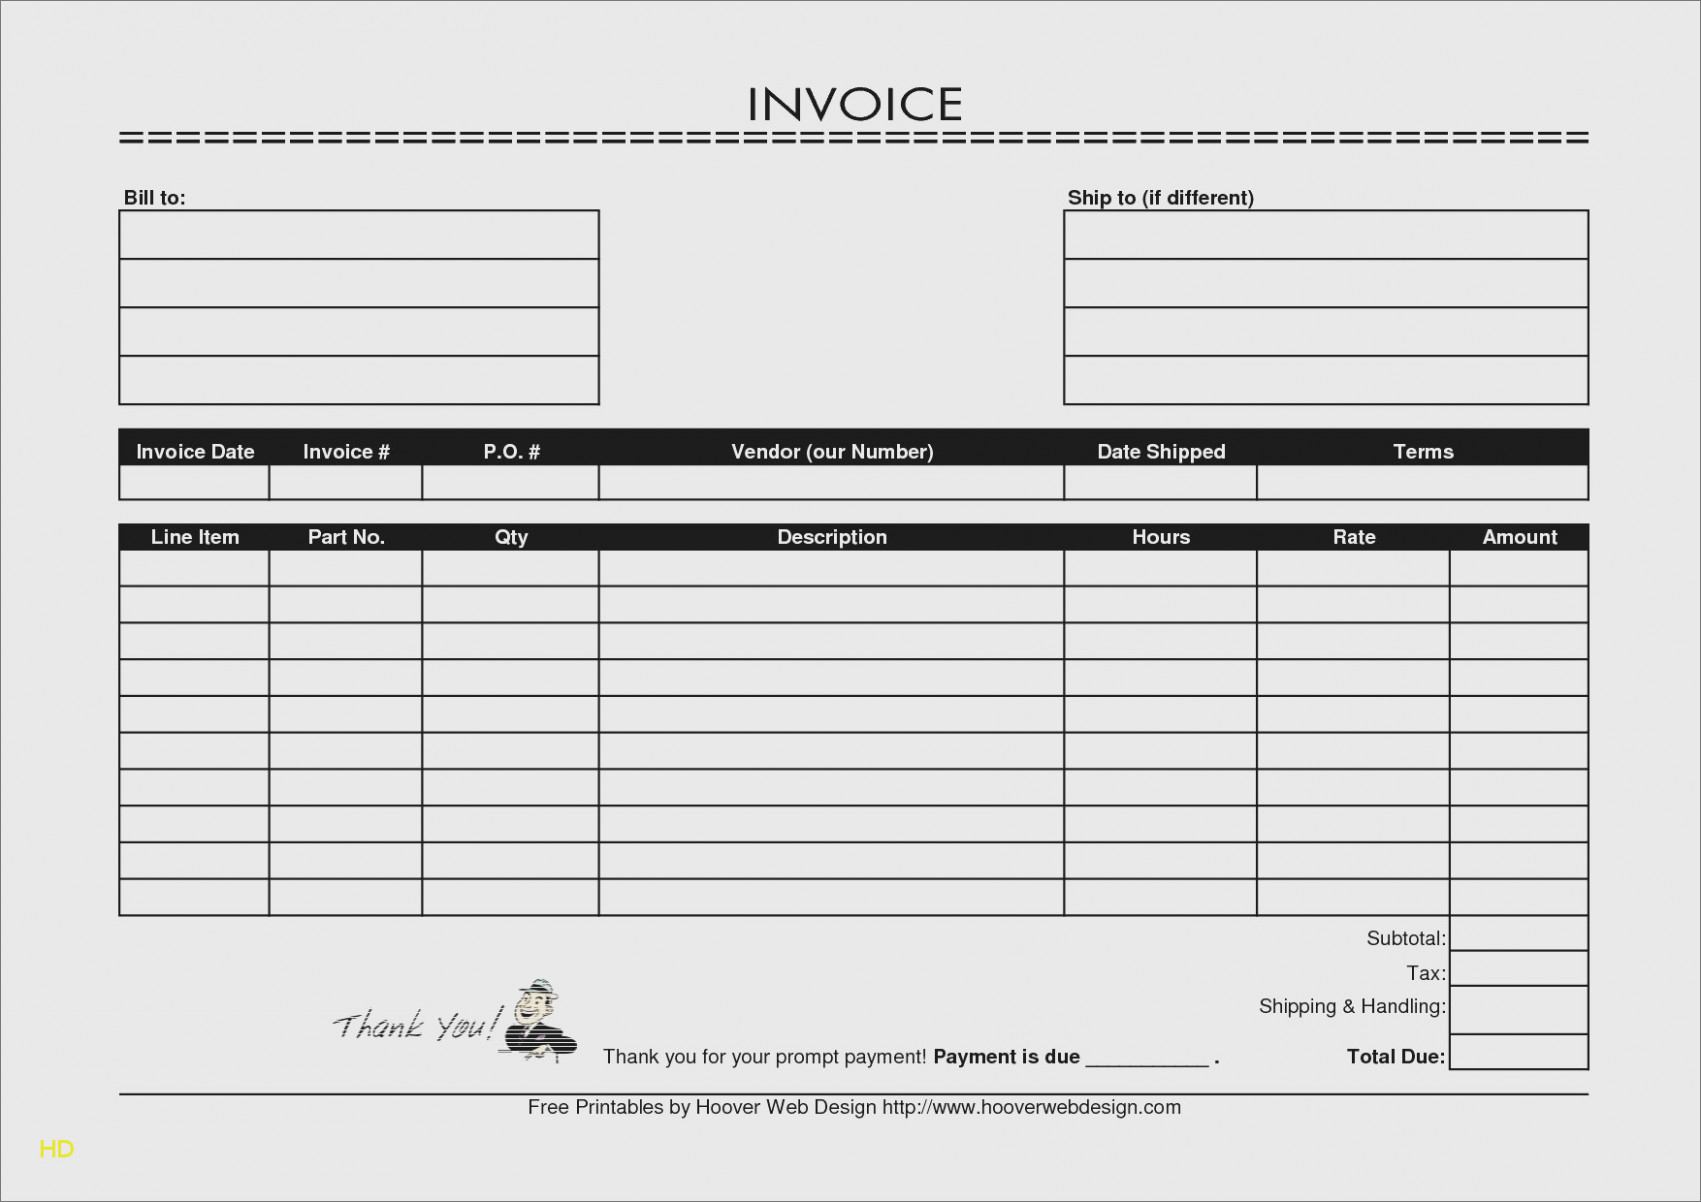 Reasons Why Free Printable | Invoice And Resume Template Ideas - Free Printable Invoice Templates